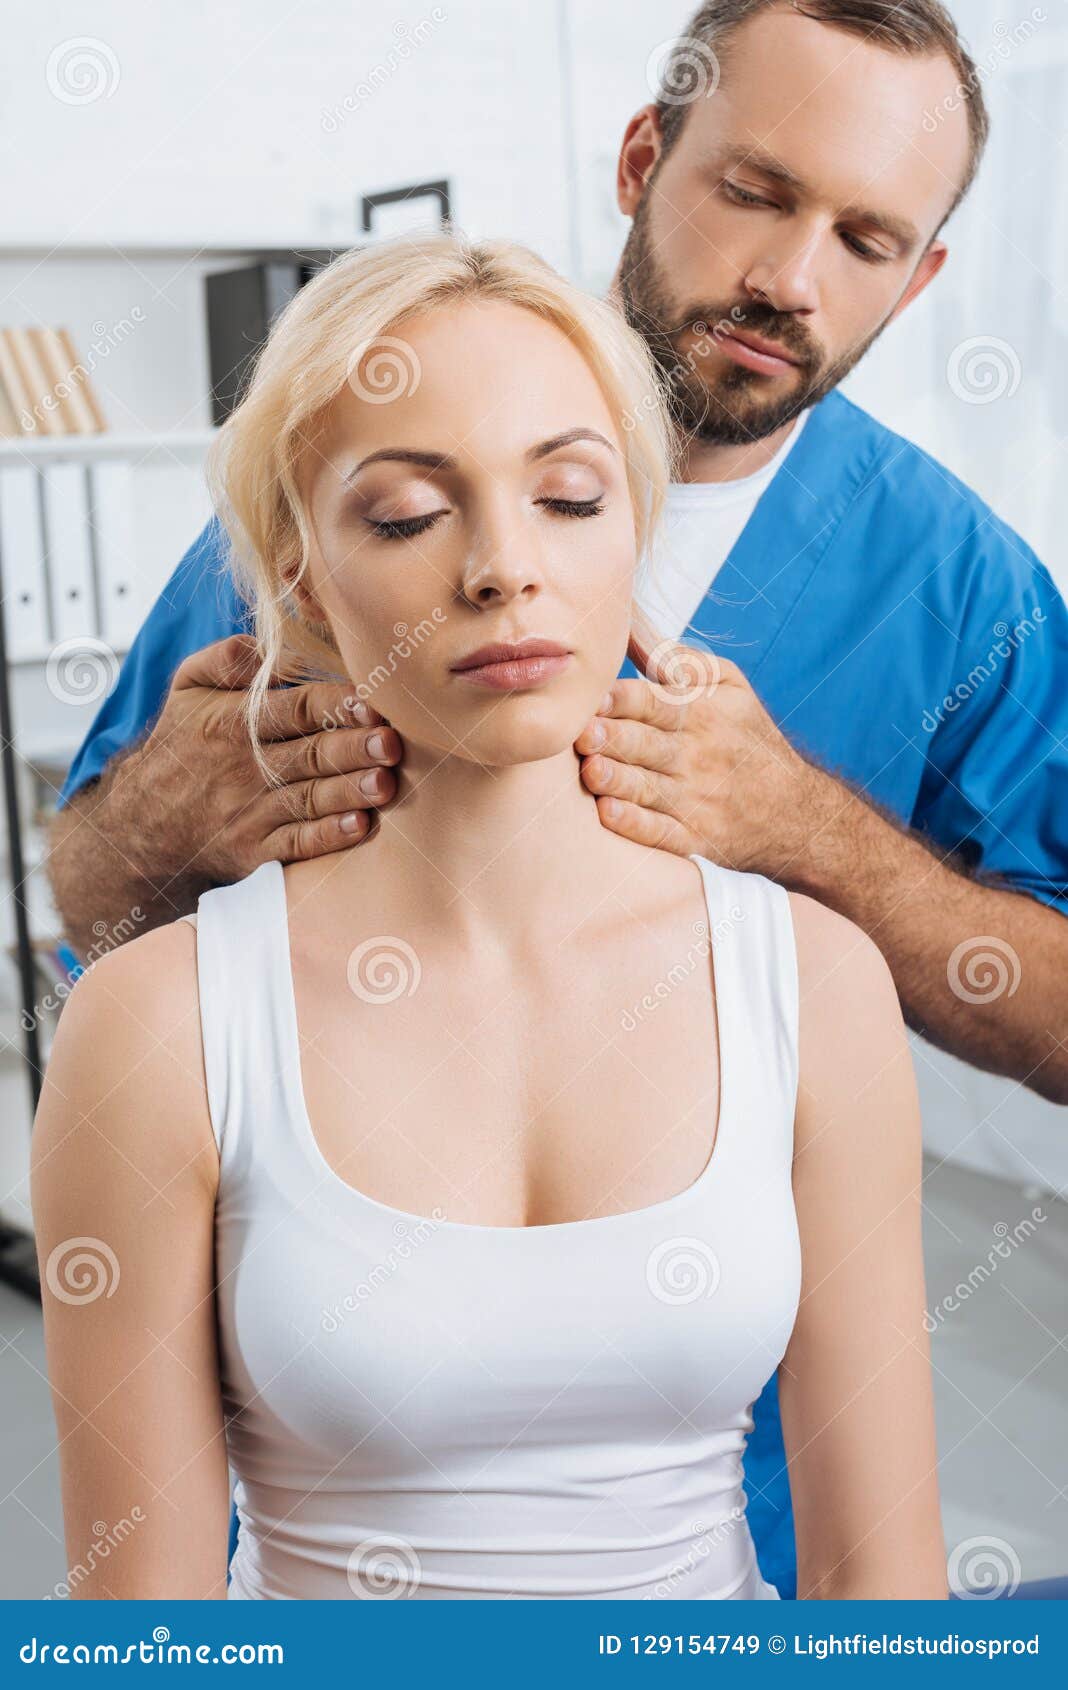 Portrait Of Massage Therapist Massaging Neck Of Young Woman Stock Image Image Of Healthcare